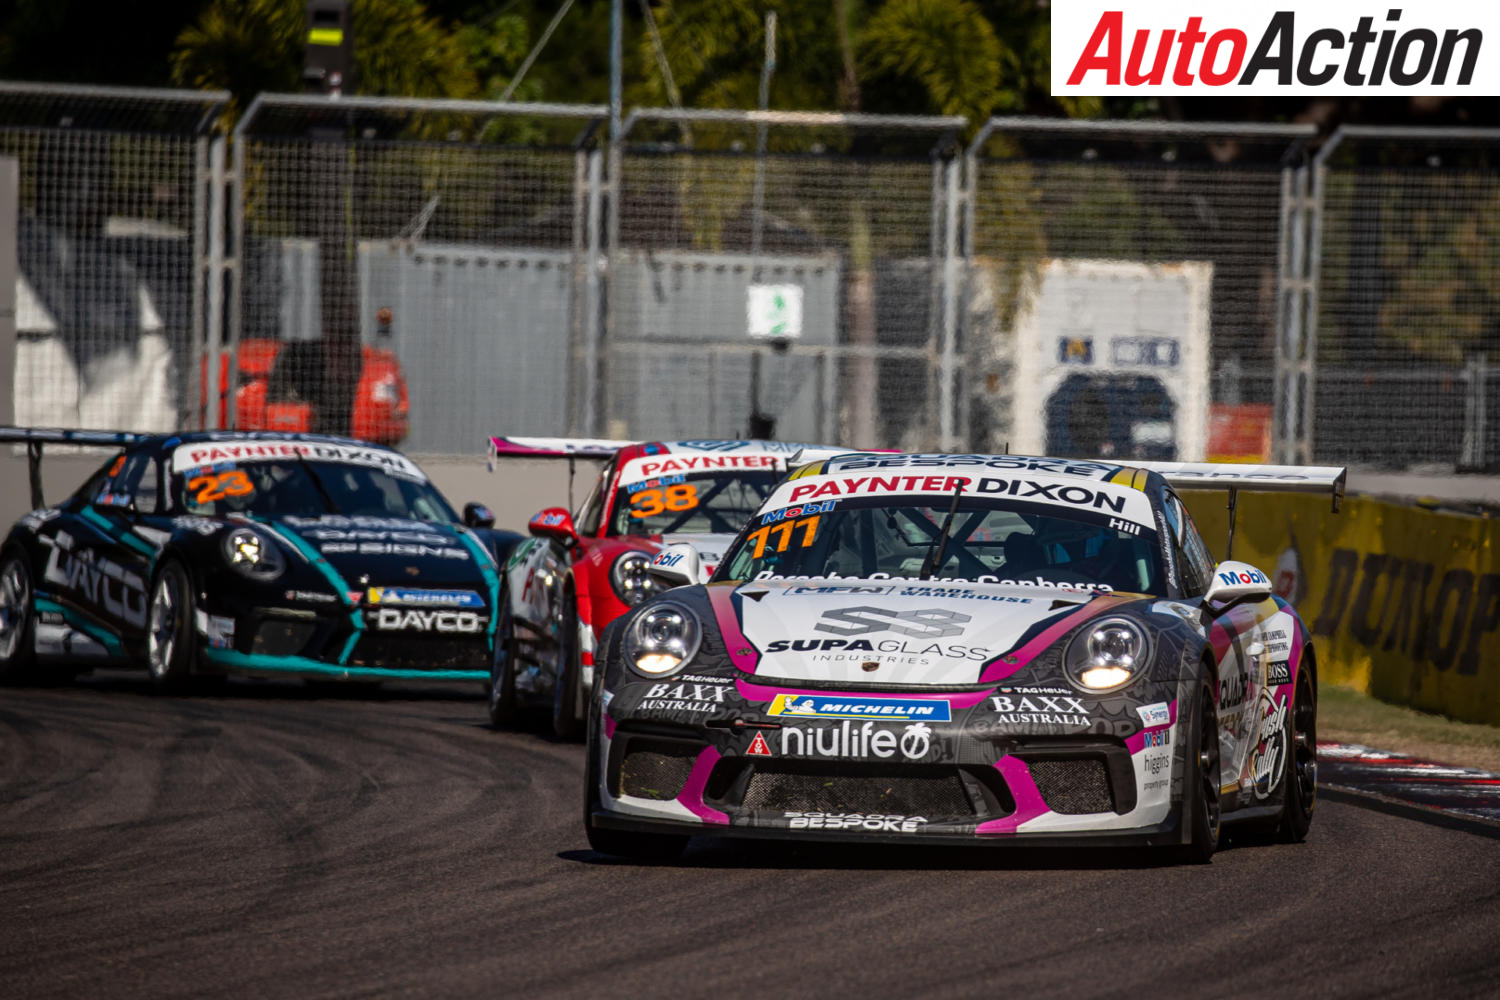 CARRERA CUP ADOPTS DROP A ROUND RULE - Auto Action